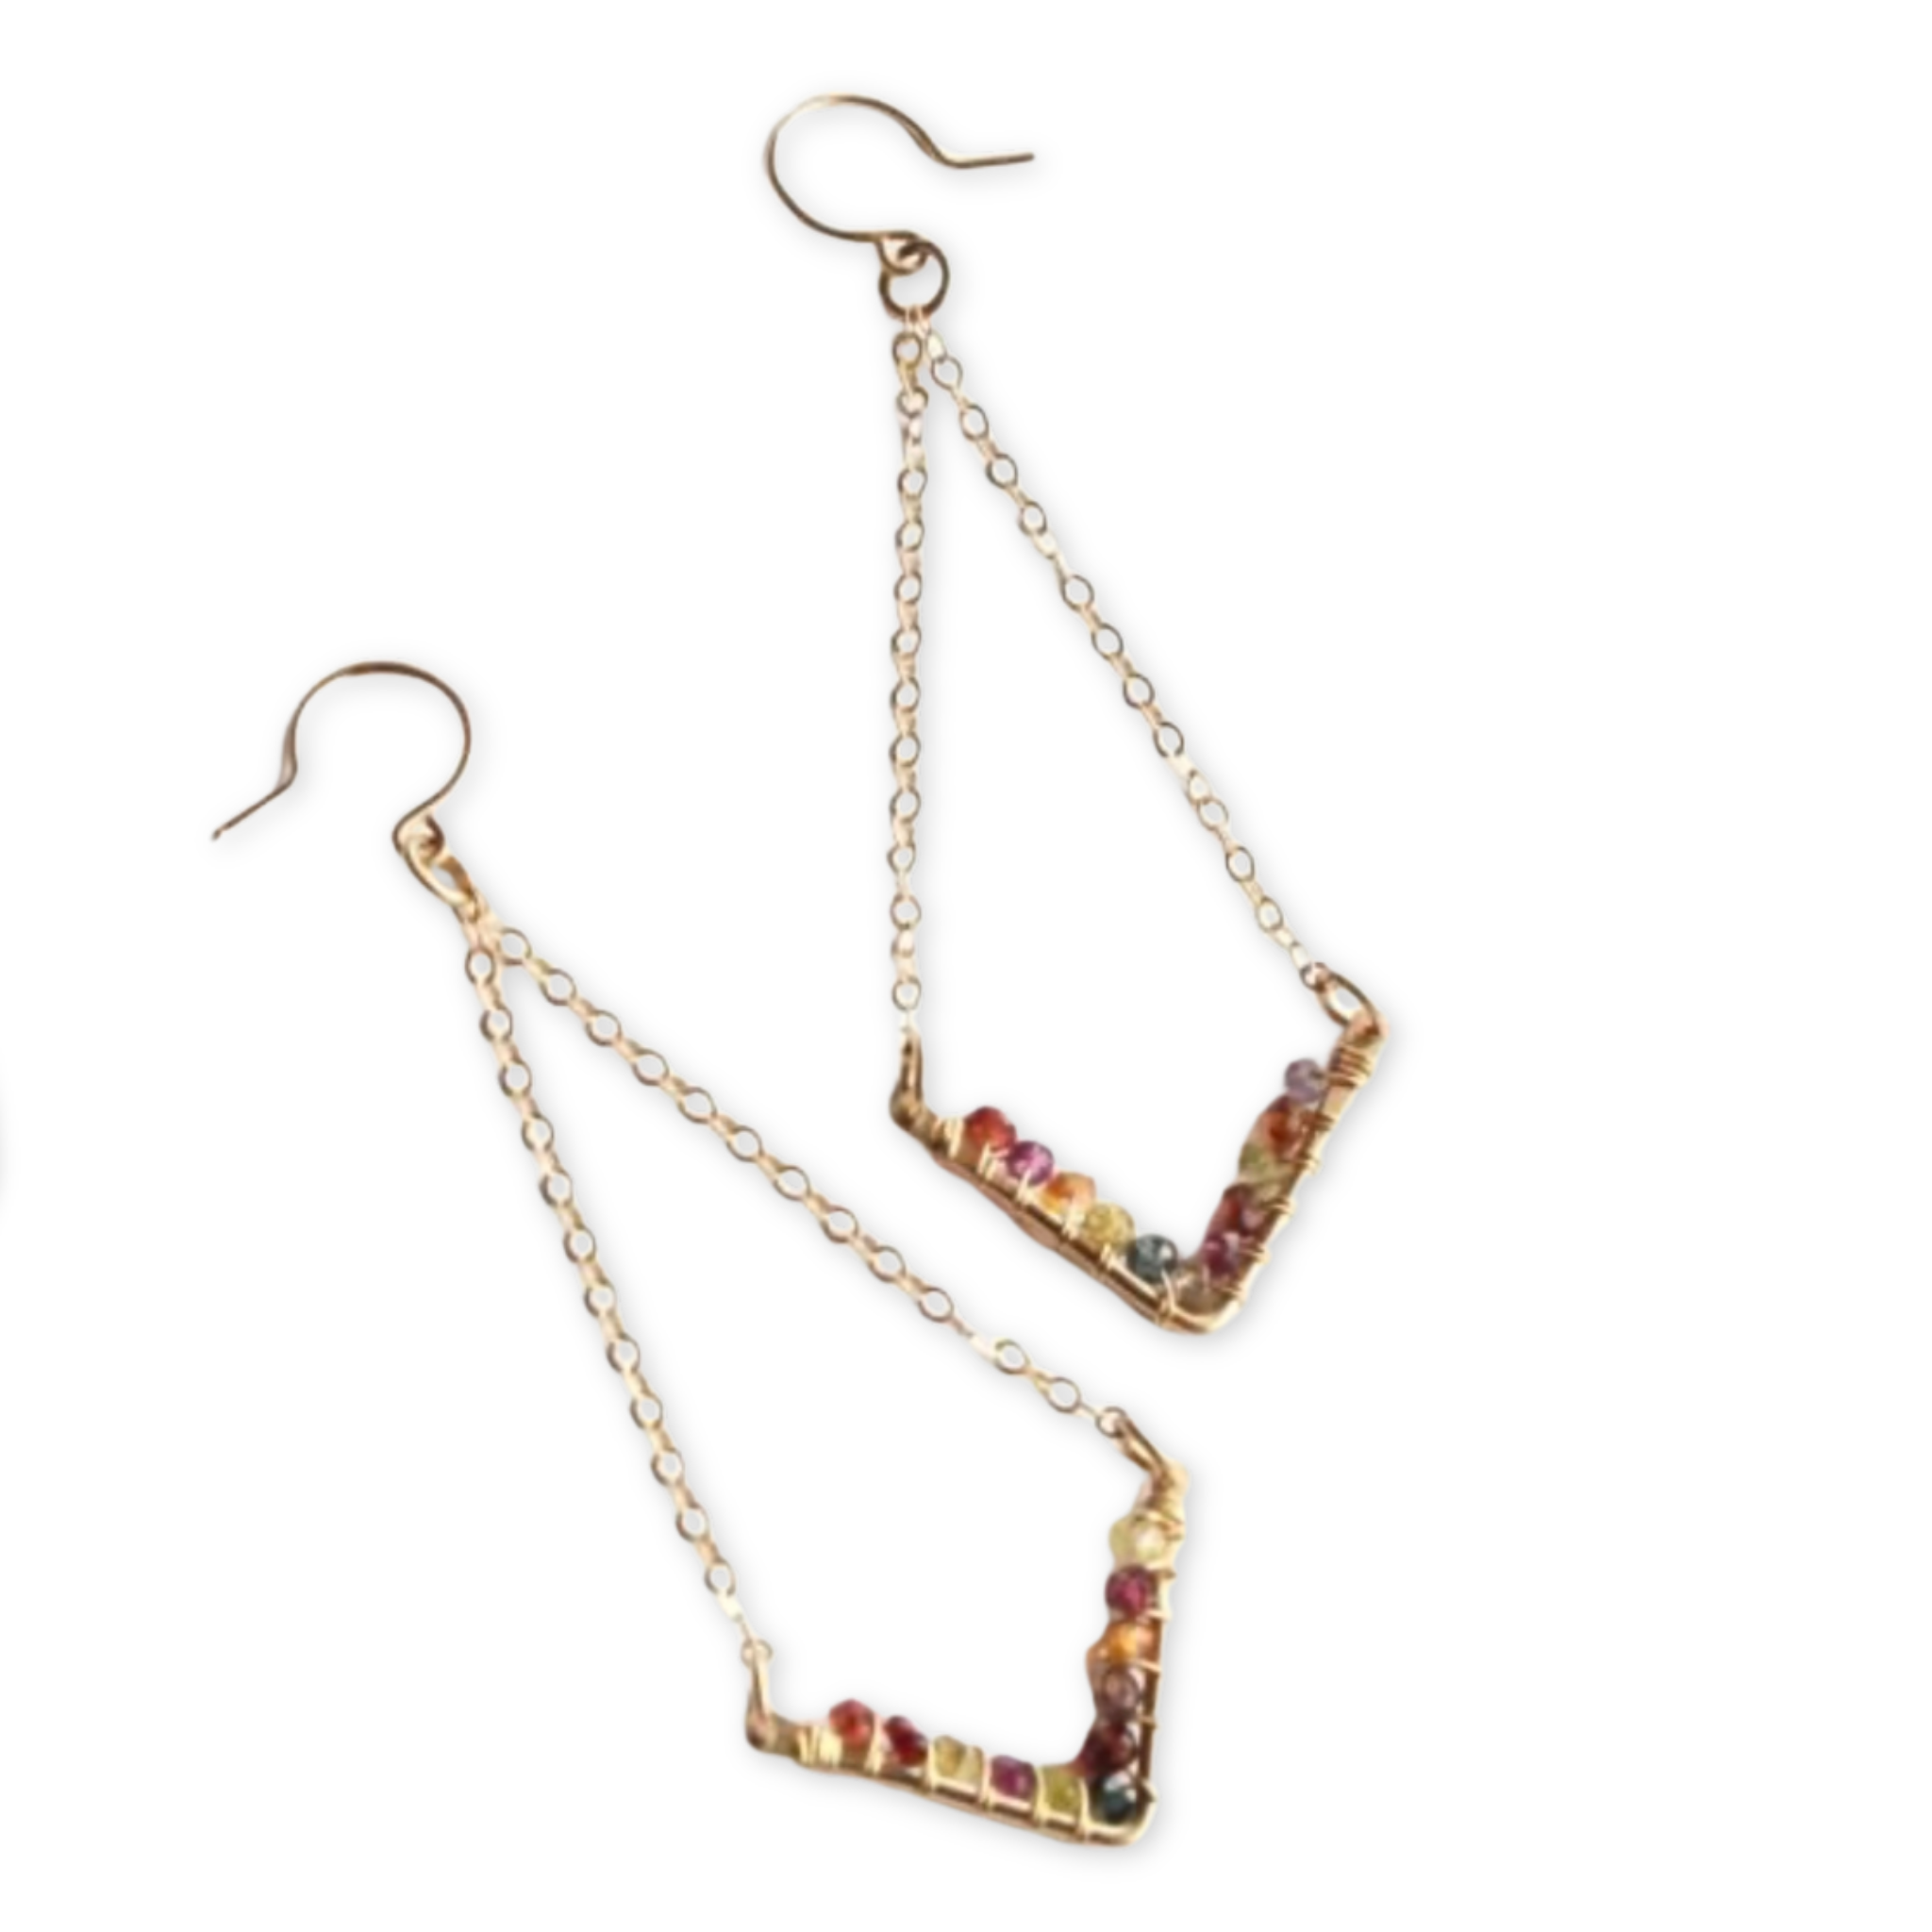 chevron shaped pendants wrapped in tiny faceted stones and hanging from thin chains and ear wire